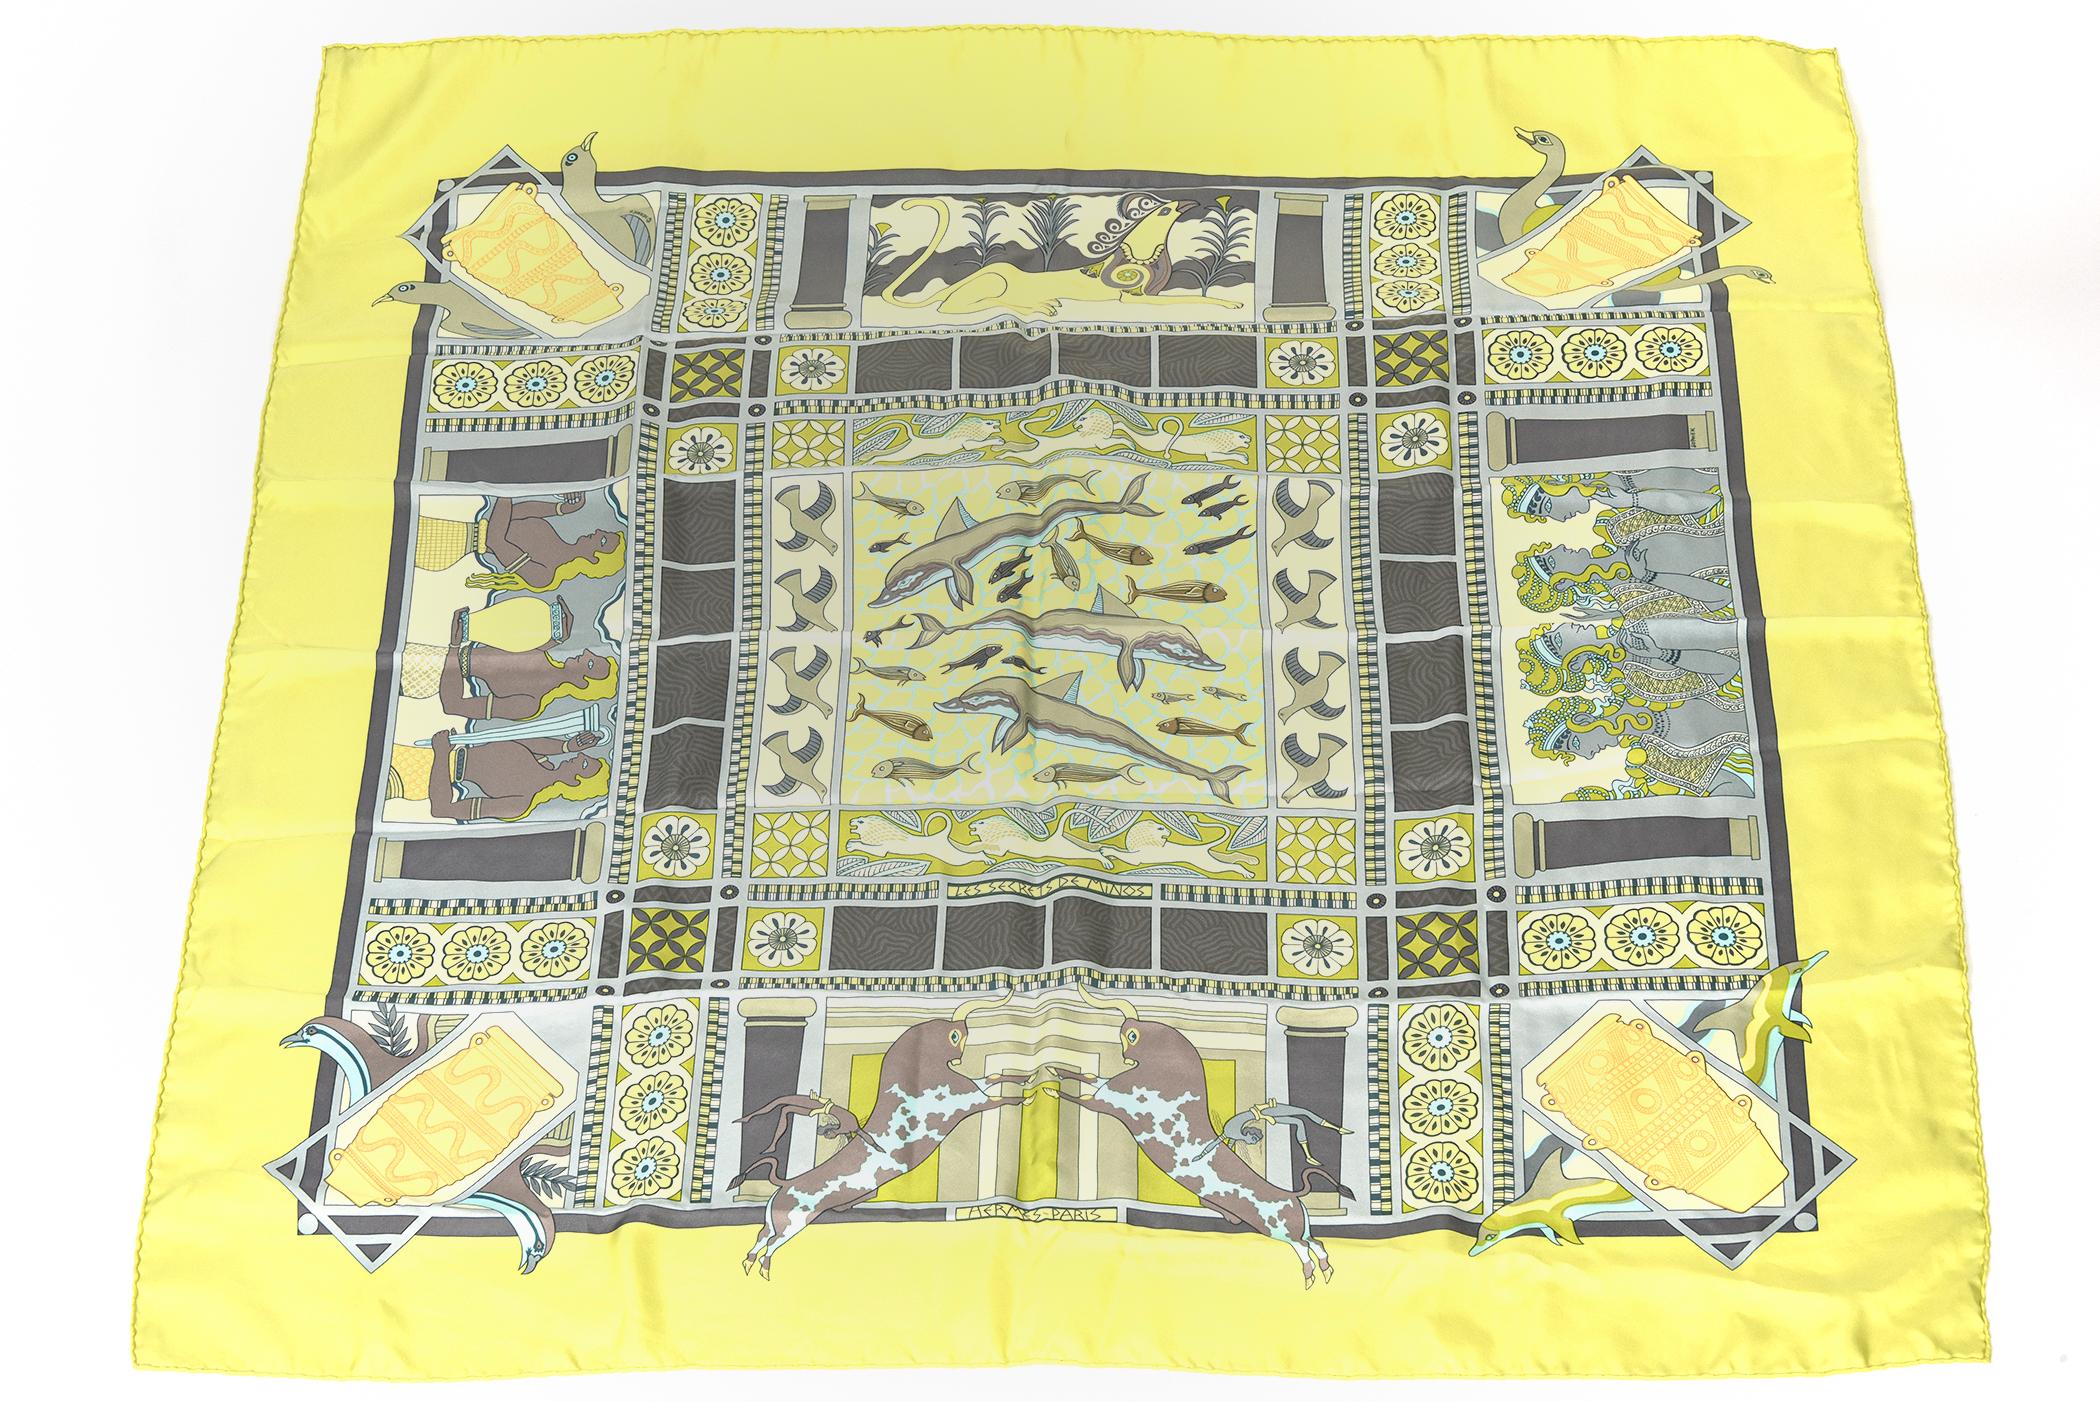 This beautiful Hermès scarf was designed by Sophie Koechlin in 2003.  The title is 